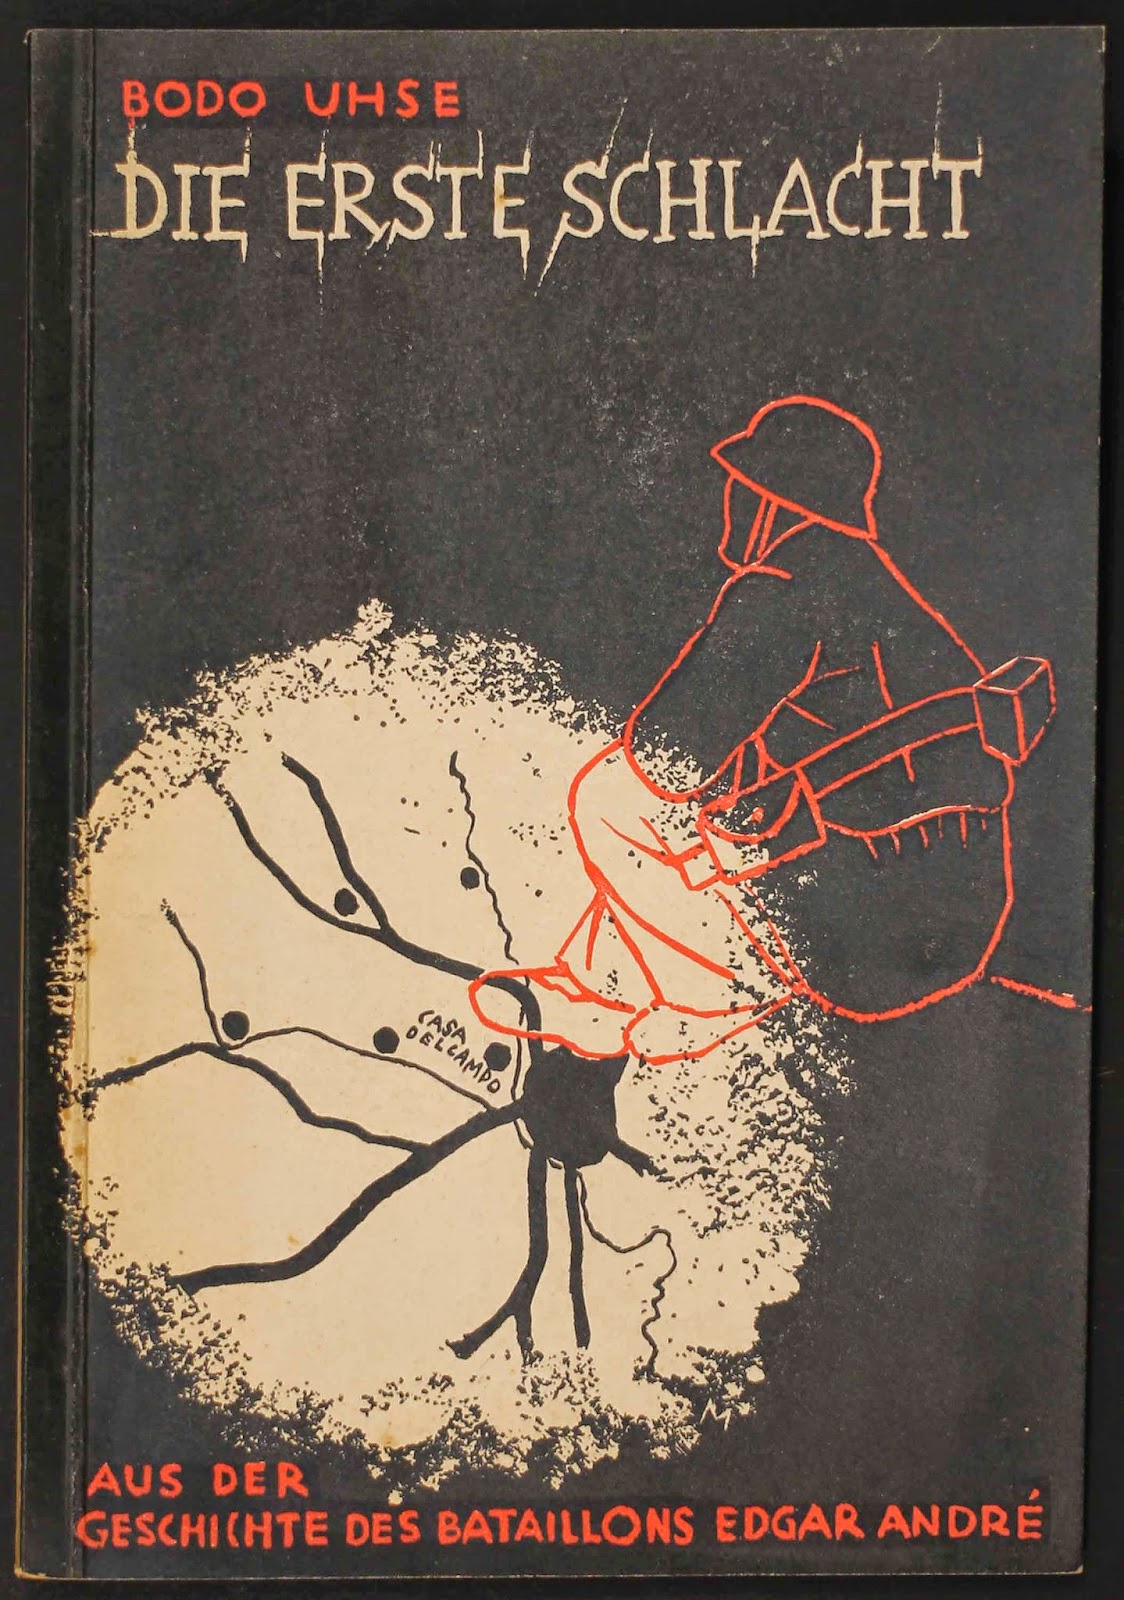 "Die erste Schlact" with cover showing a line drawing of a soldier superimposed over a section of a map labeled casa delcamp.